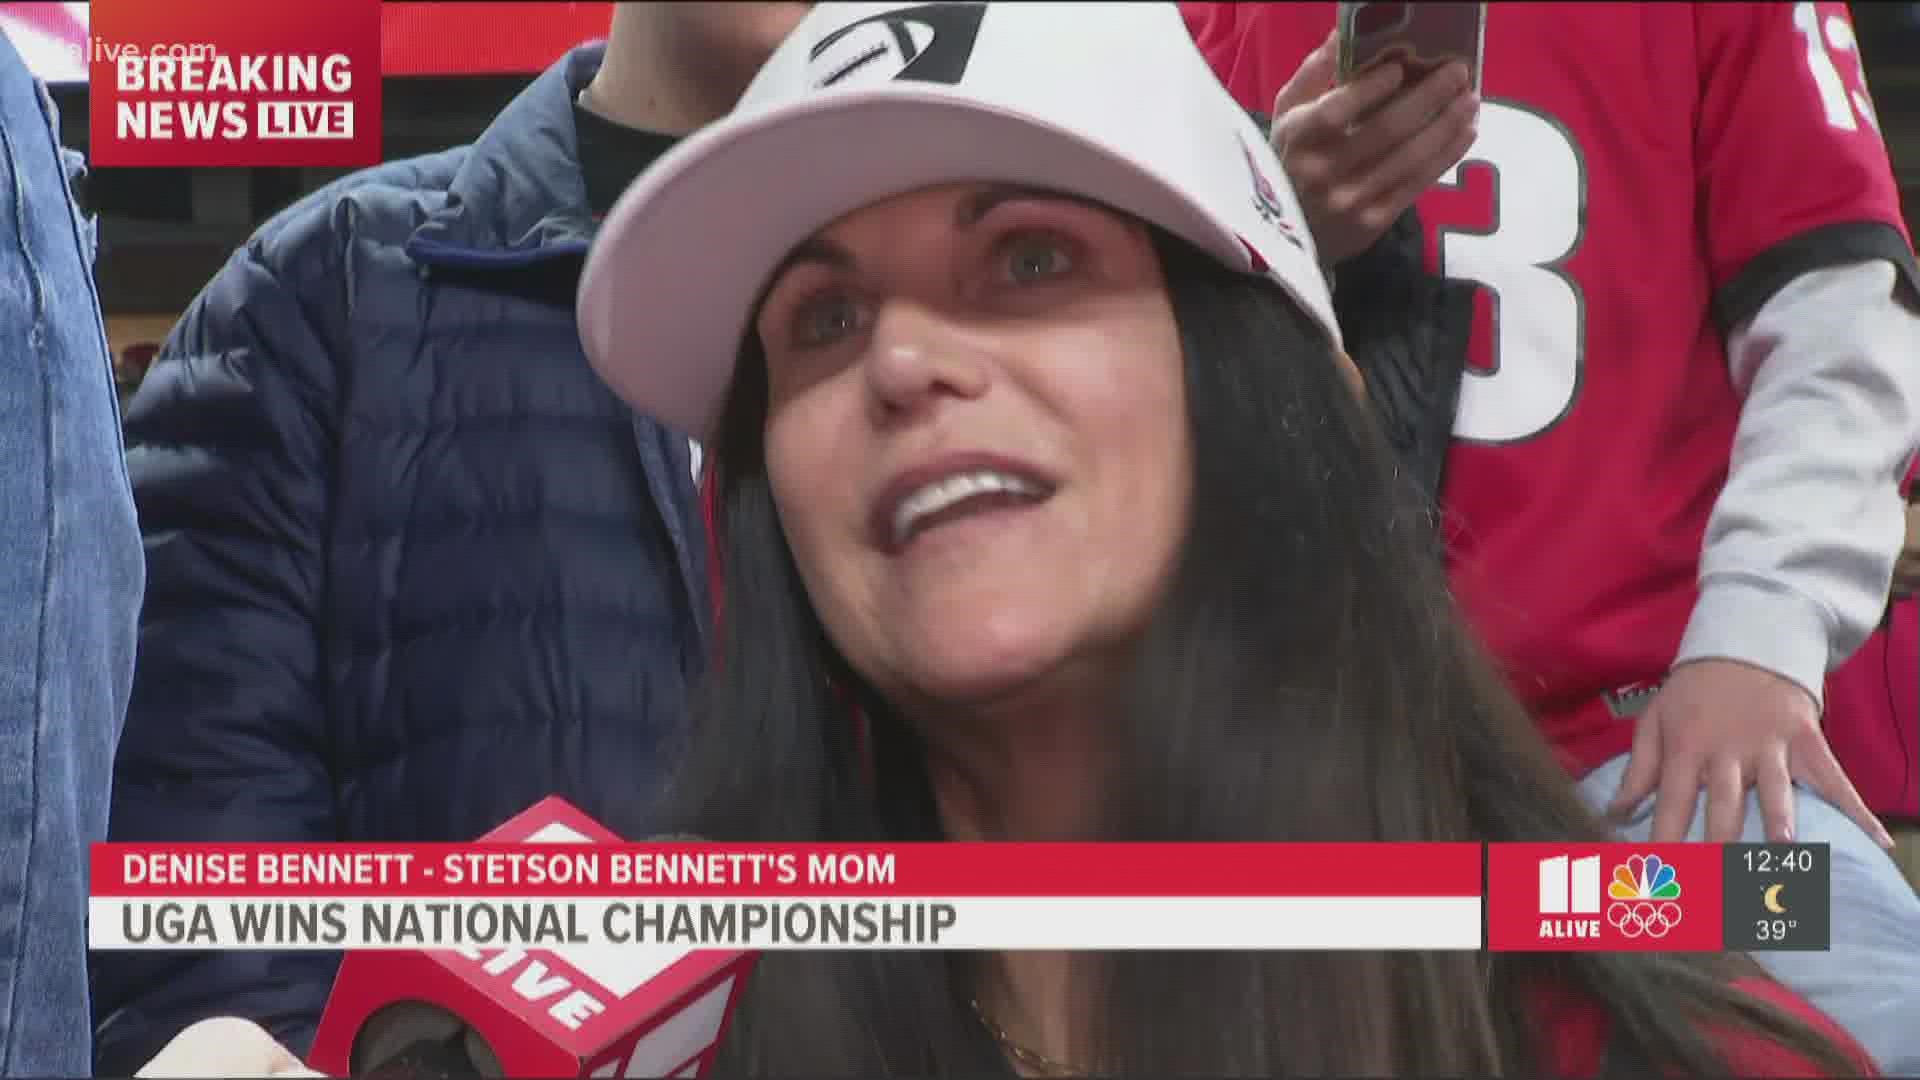 Stetson Bennett's mom Denise speaks to 11Alive's Maria Martin after her son leads the Georgia Bulldogs to the national championship title.